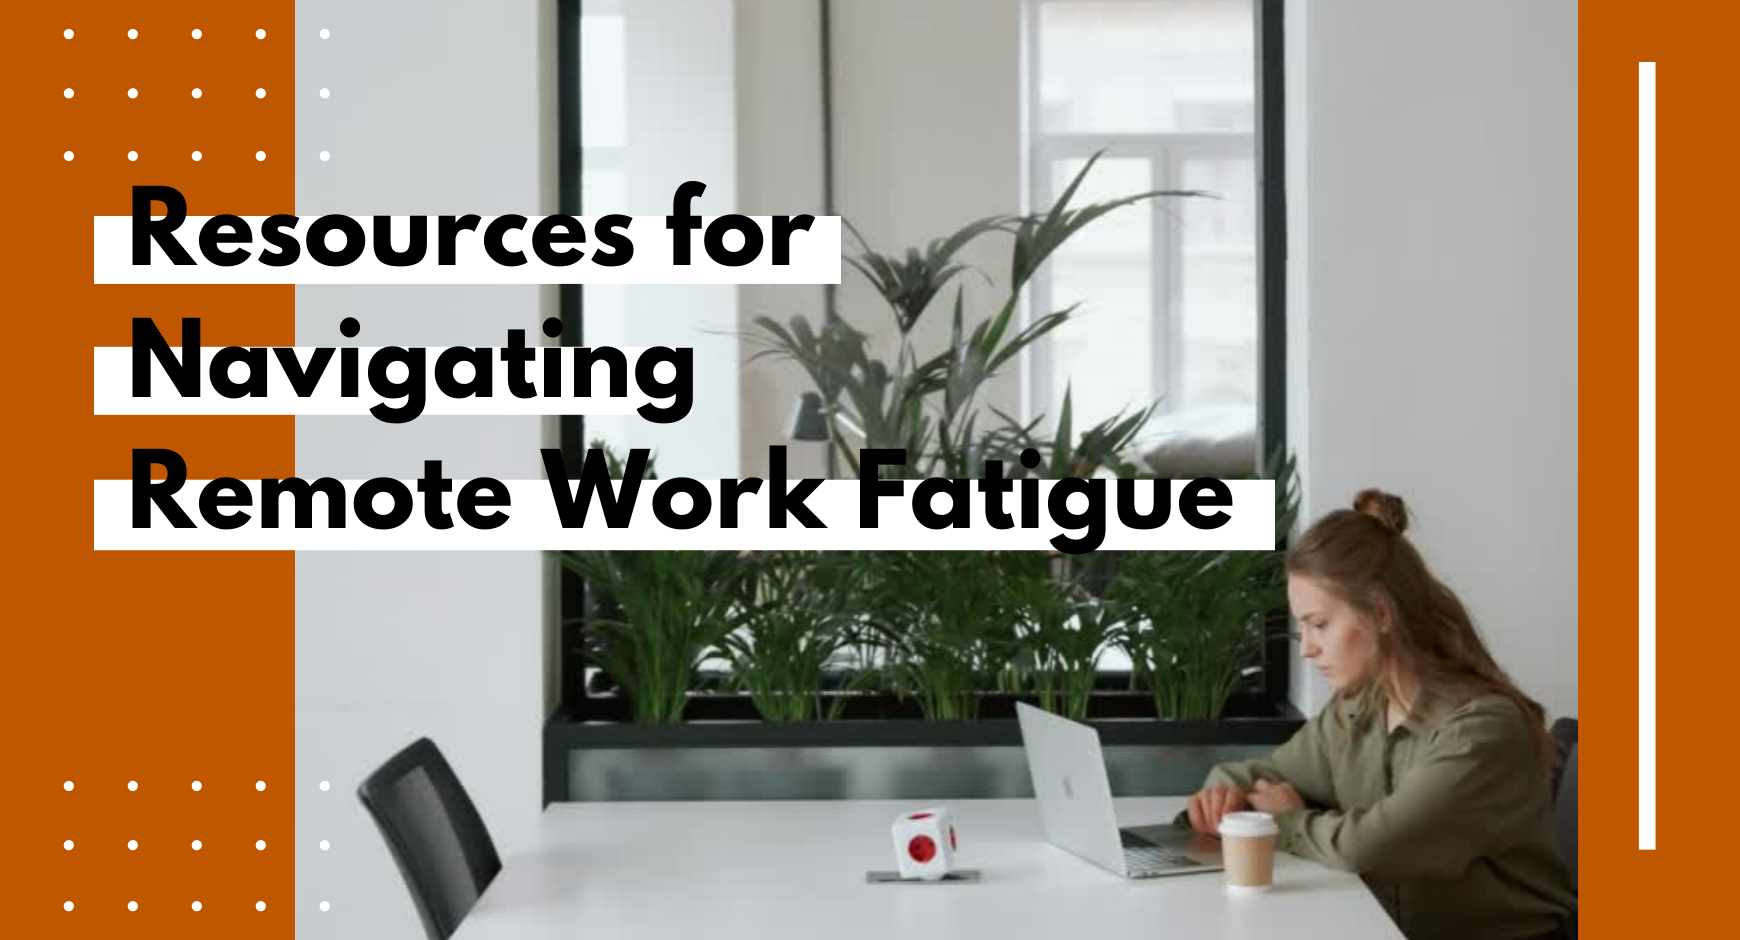 A woman siting in front of a laptop at a table behind the words "Resources for Navigating Remote Work Fatigue"